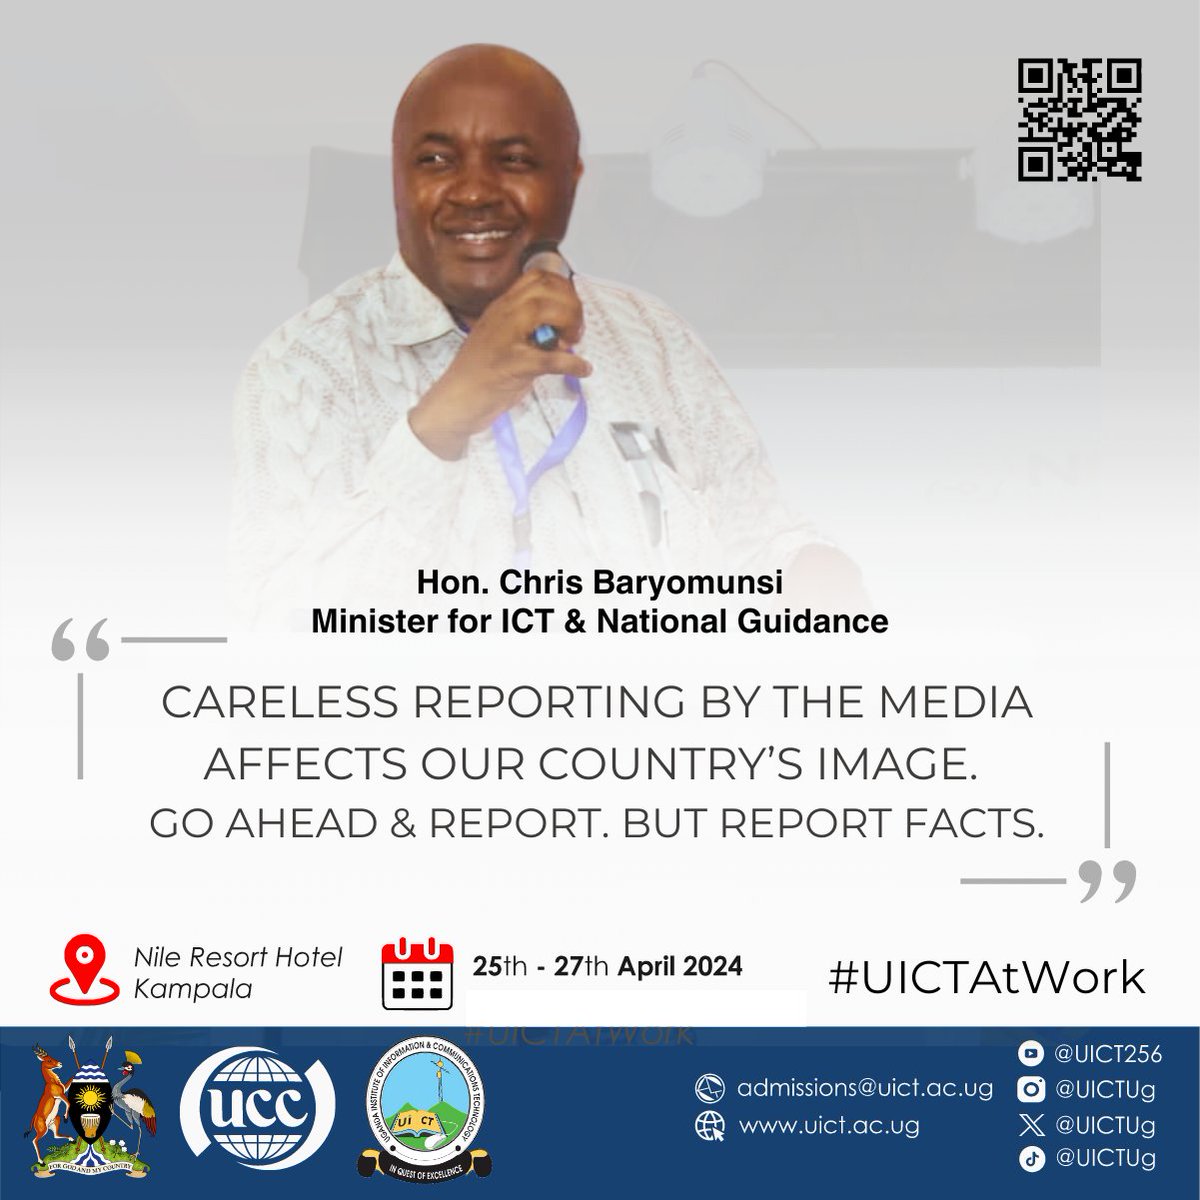 In communication, 'truth' is the only holy grail of journalism. Before reporting, think of Uganda's image first. @CHRISBARYOMUNS1 @MosesWatasa #Musevenomics #UICTAtWork